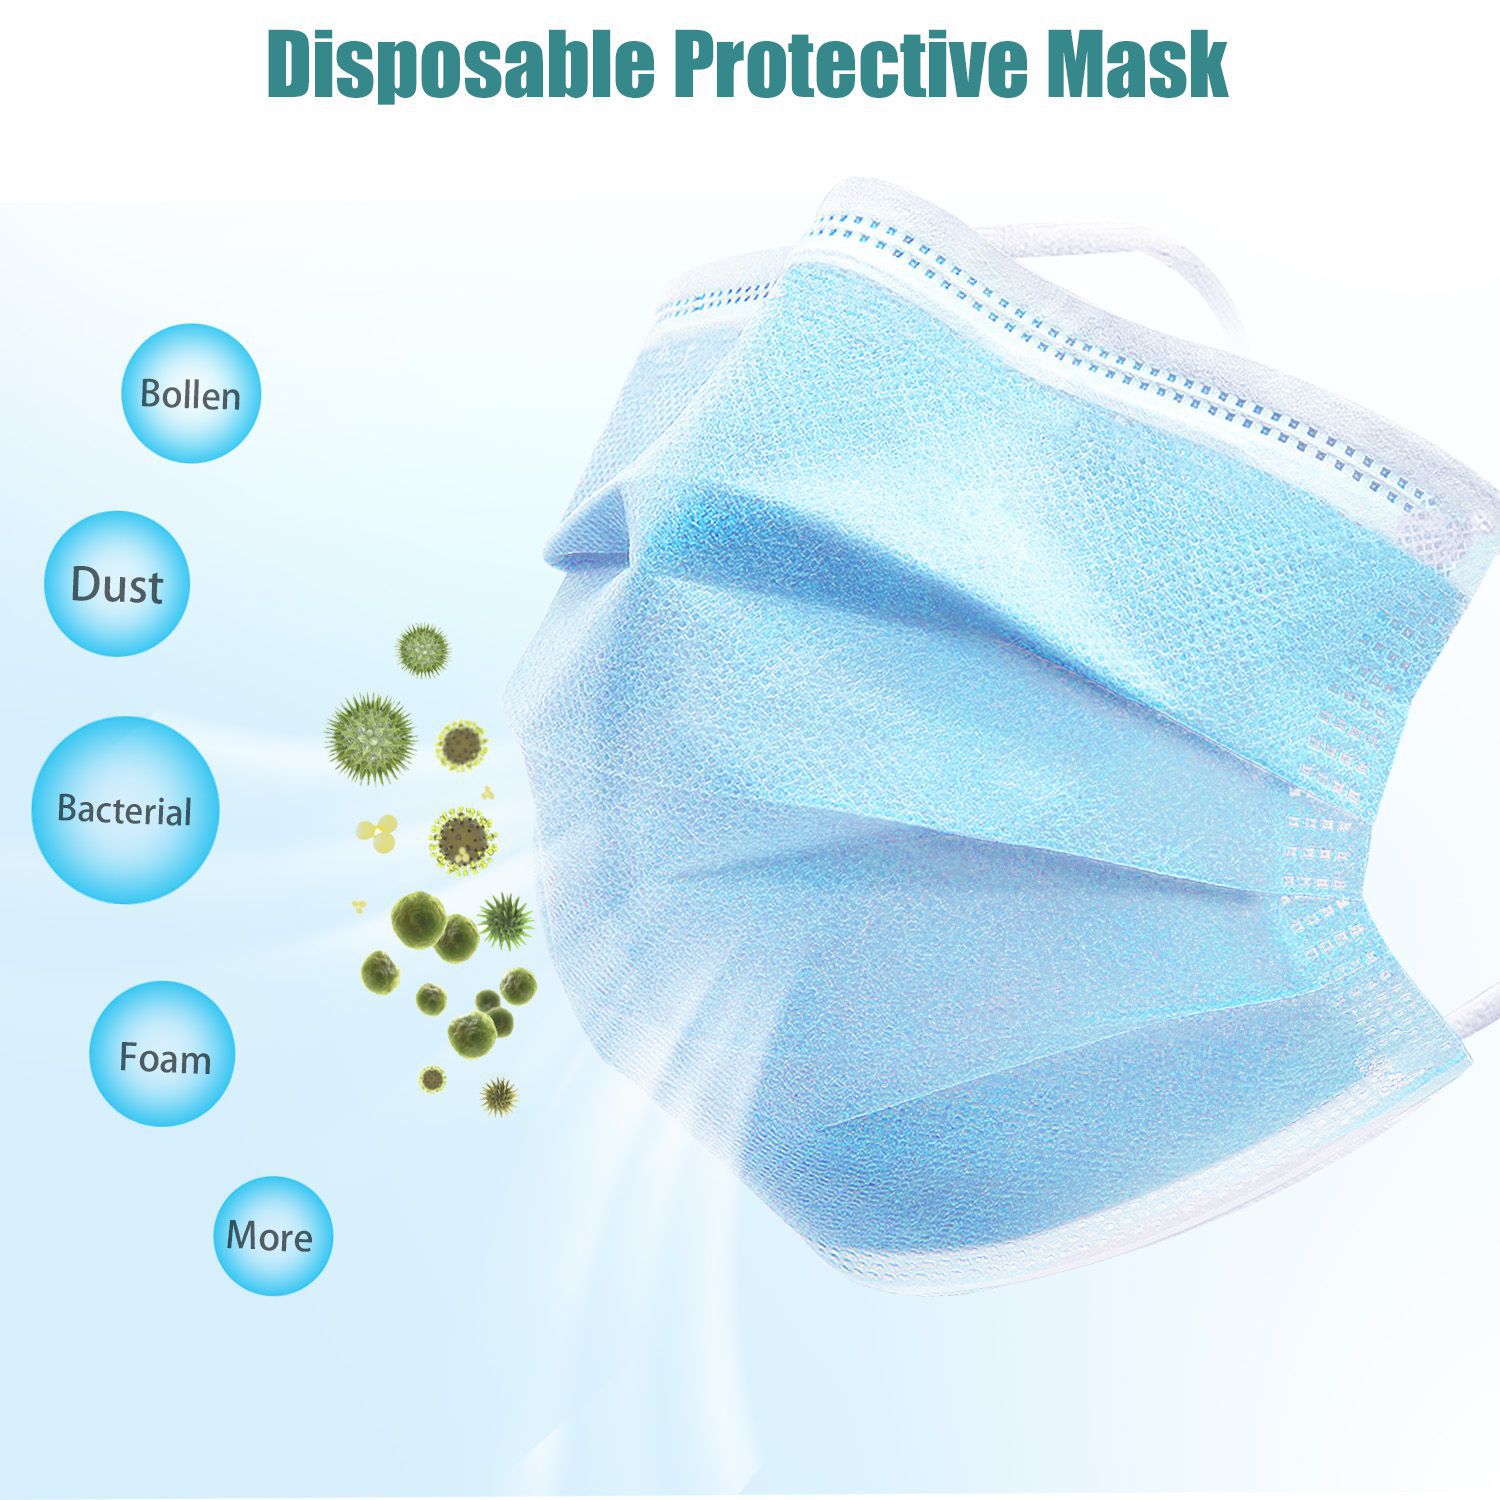 50pcs Disposable Protective Mask 3-layers Safe Breathable Mouth Face Mask CE Certified Personal Protection Free Shipping